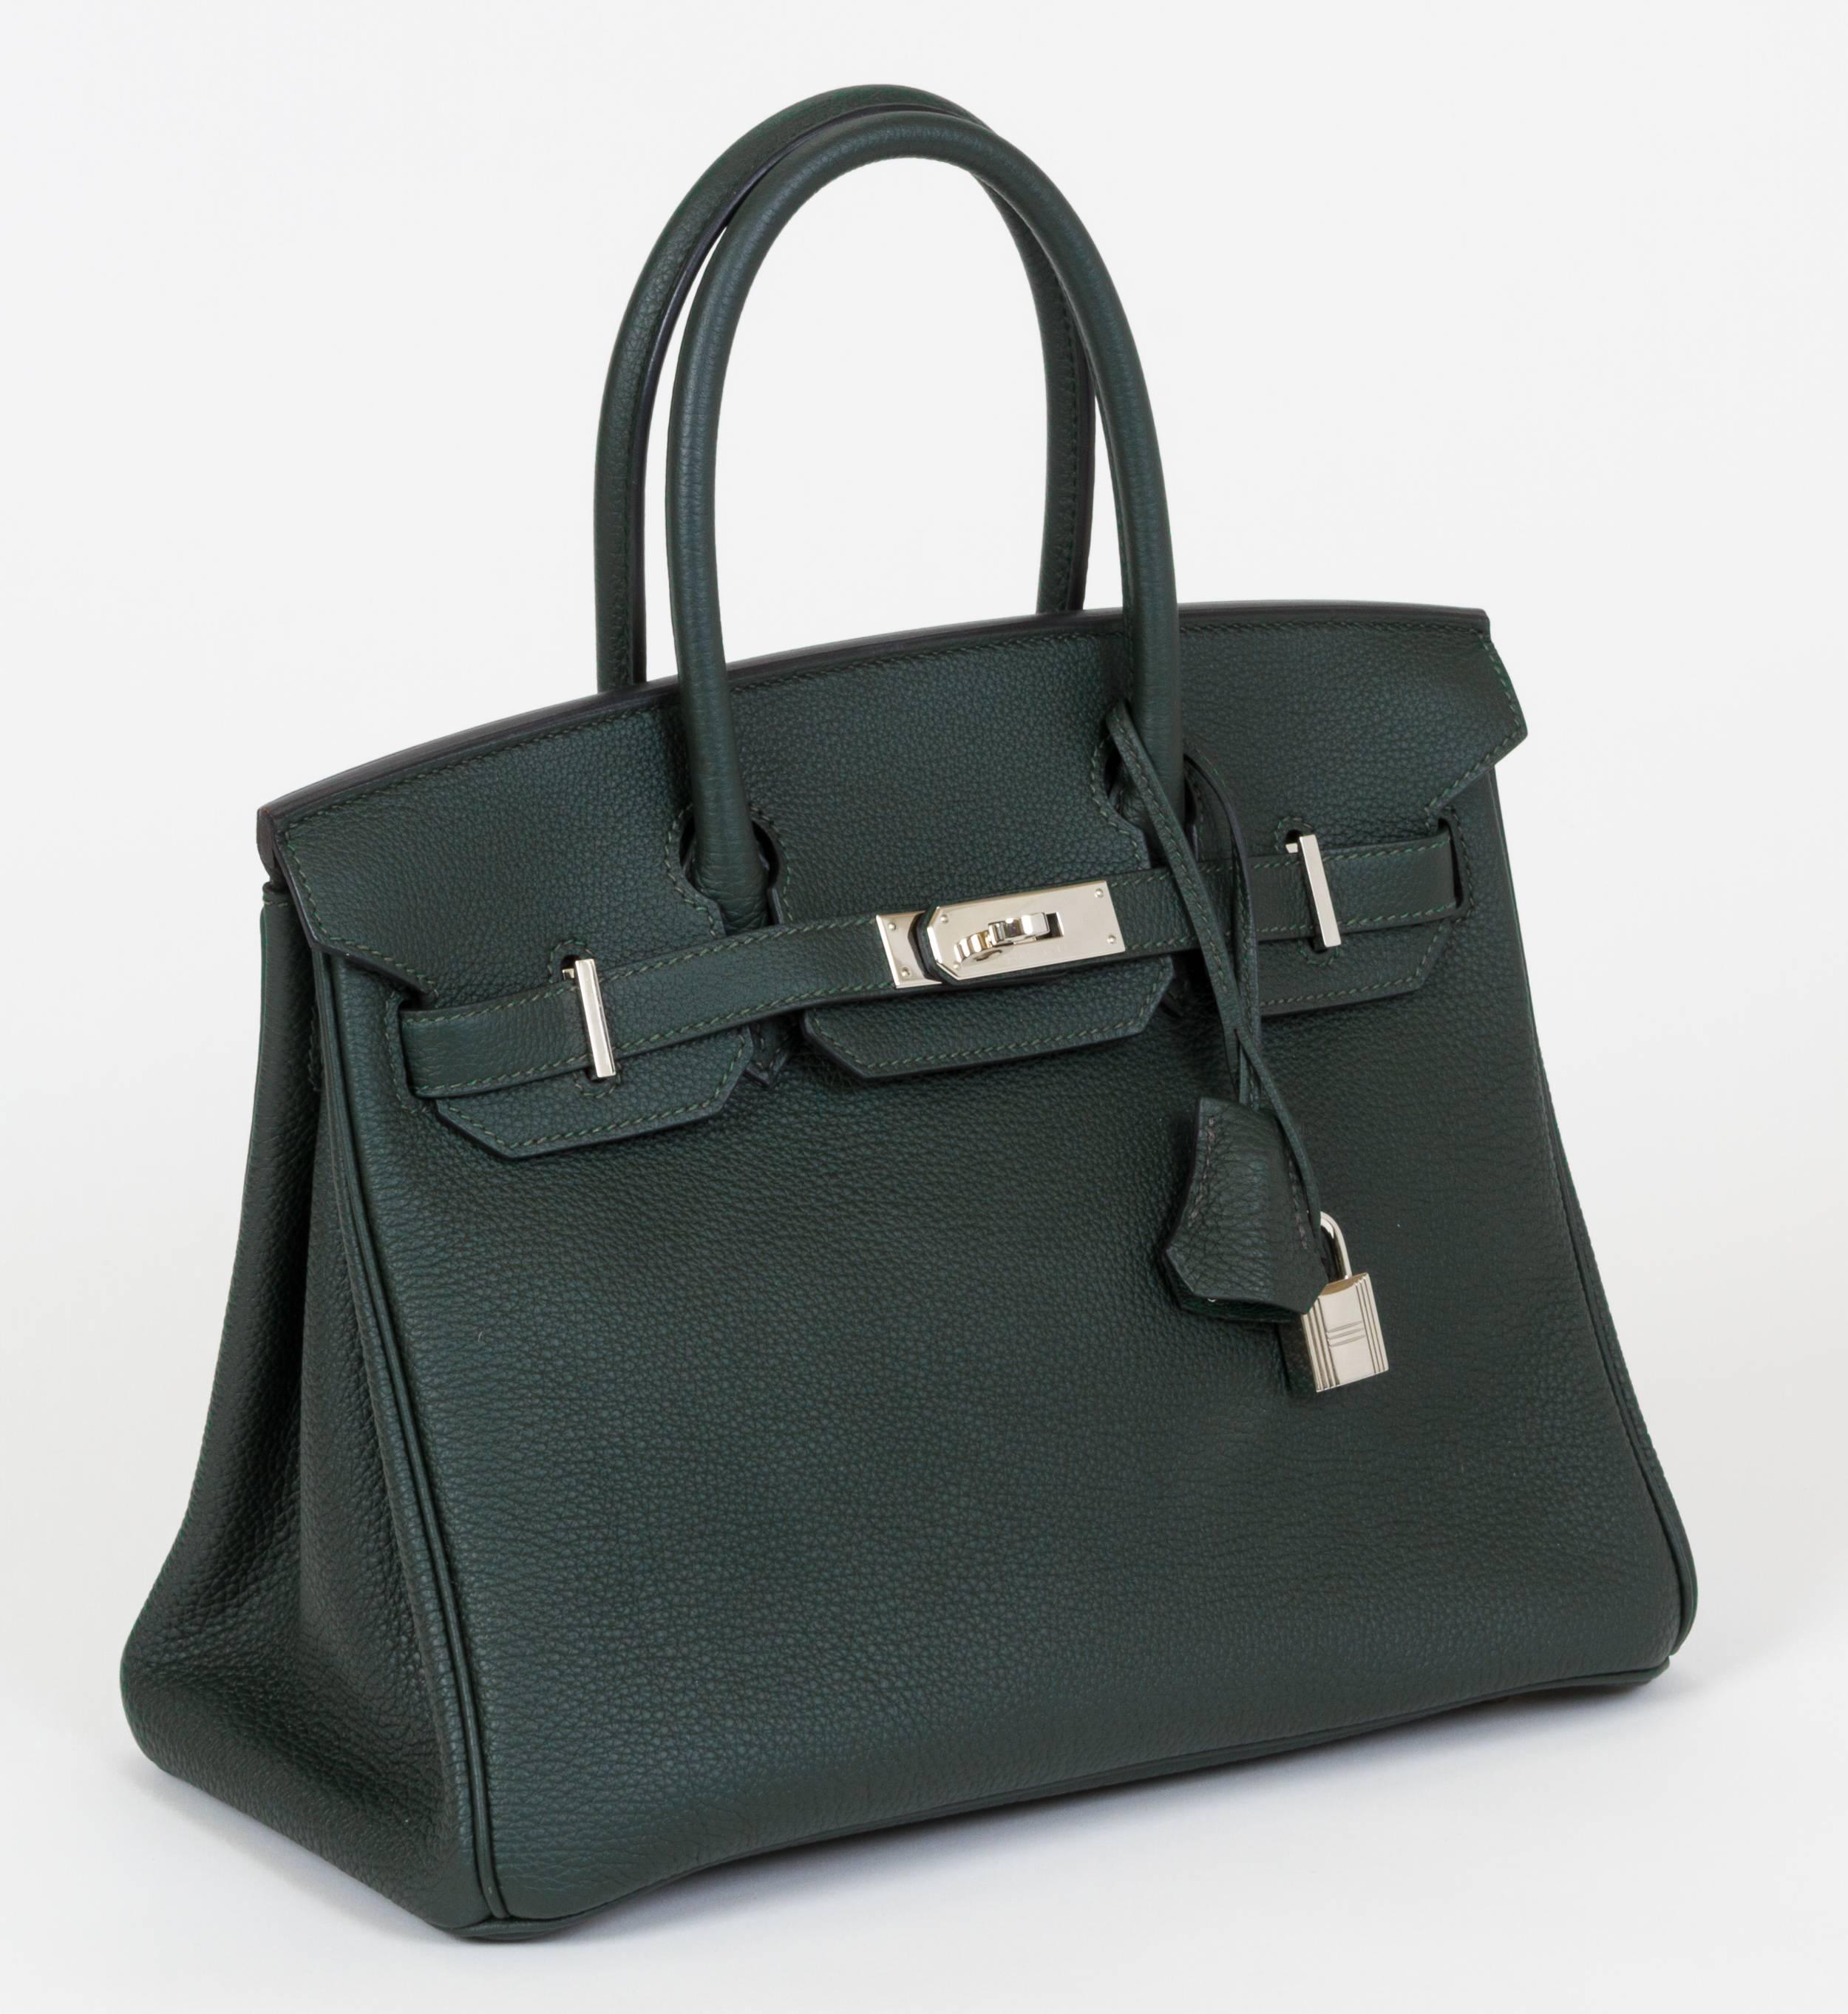 Hermes authentic Birkin 30 vert anglais togo leather and palladium hardware. Partial plastic still on 2 feet, worn very little.  X stamp for 2016. Handle drop 4". Comes with full set: clochette, tirette, lock, keys, dust cover, rain jacket,